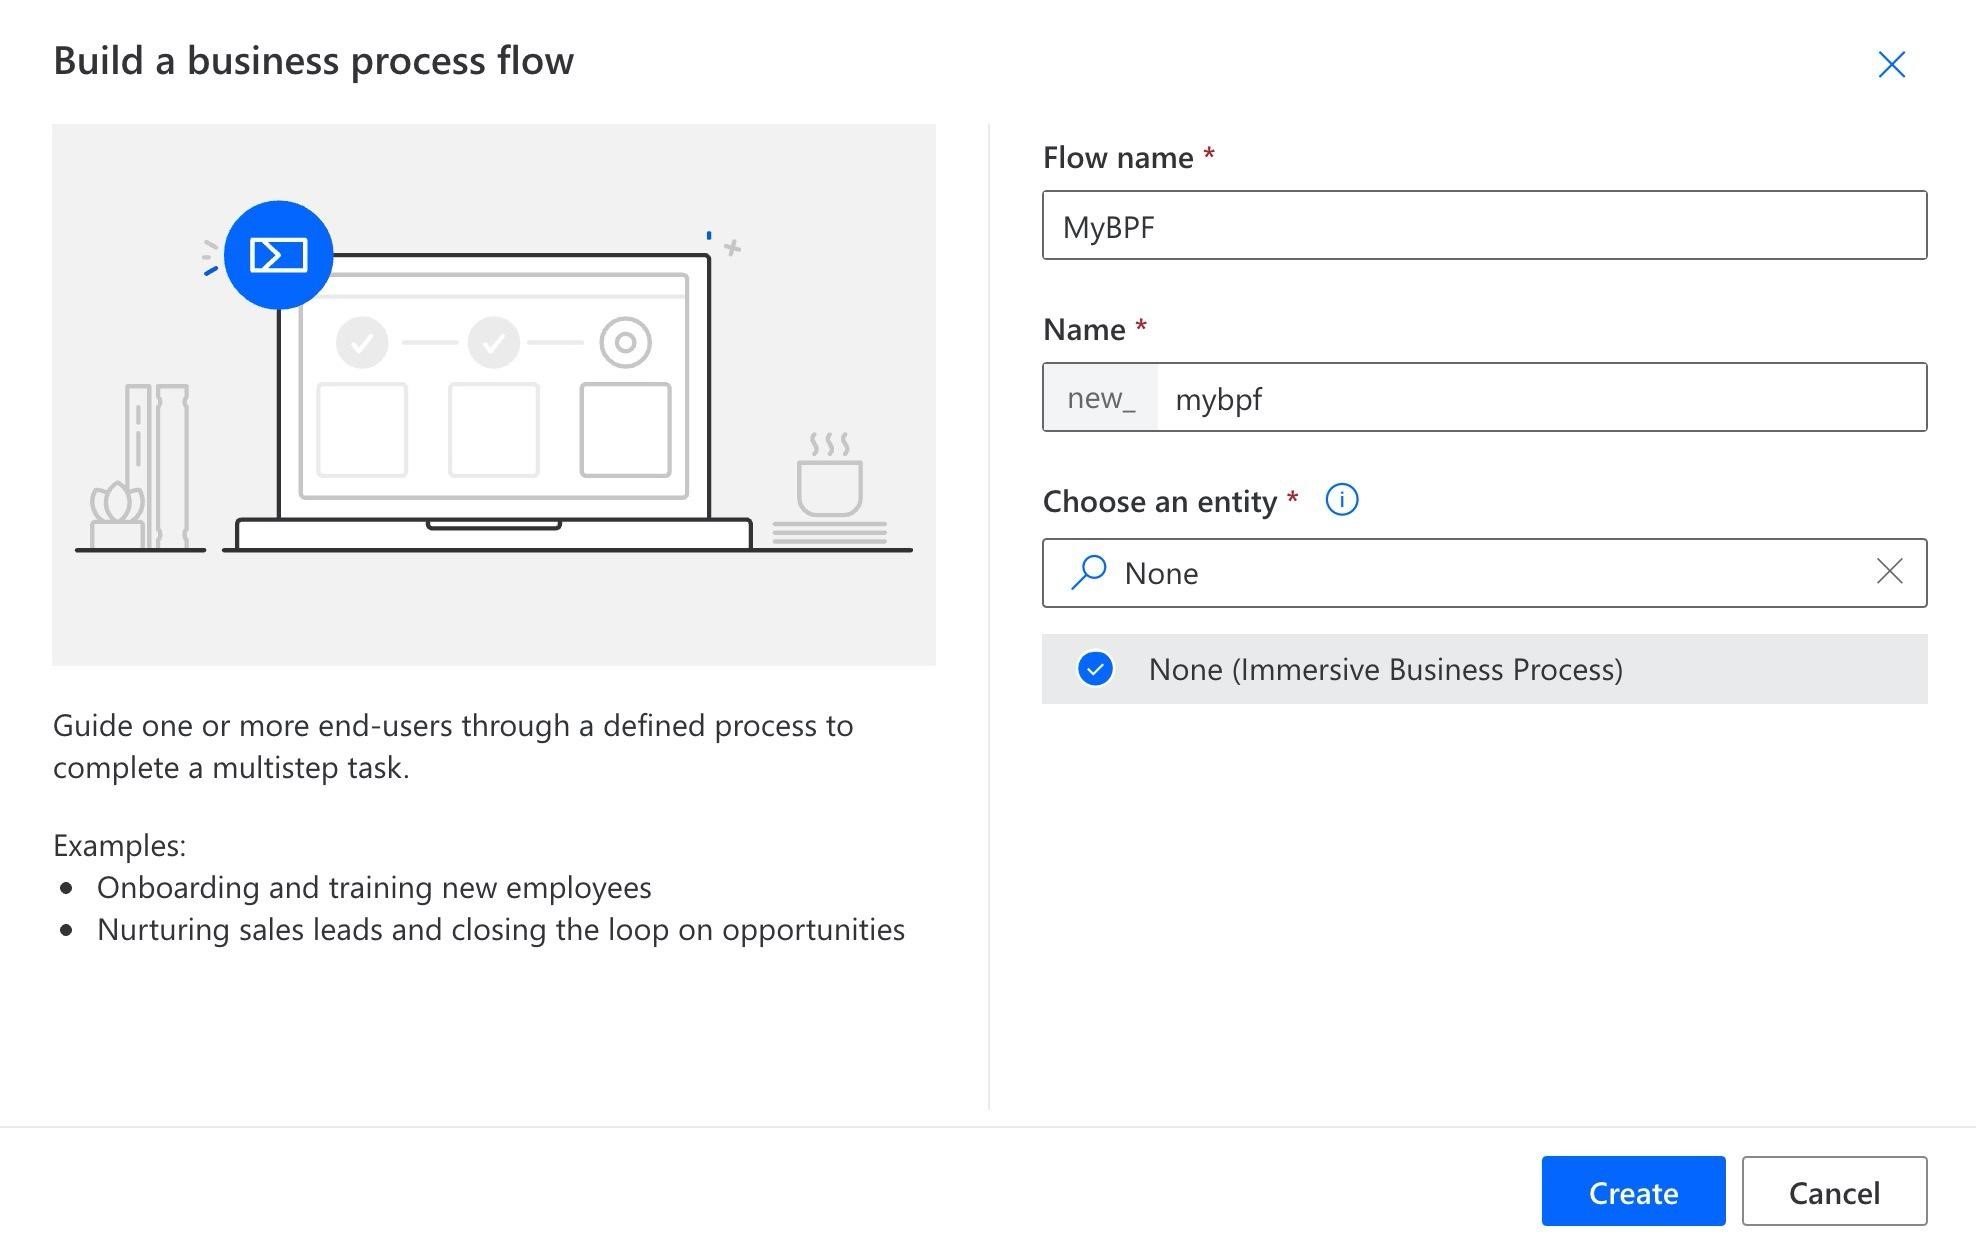 Build a business process flow x

Flow name *

; MyBPE

Name *

new_  mybpf

Choose an entity * @

2 None x

@ None (Immersive Business Process)

Guide one or more end-users through a defined process to
complete a multistep task.

Examples:
@ Onboarding and training new employees
e Nurturing sales leads and closing the loop on opportunities